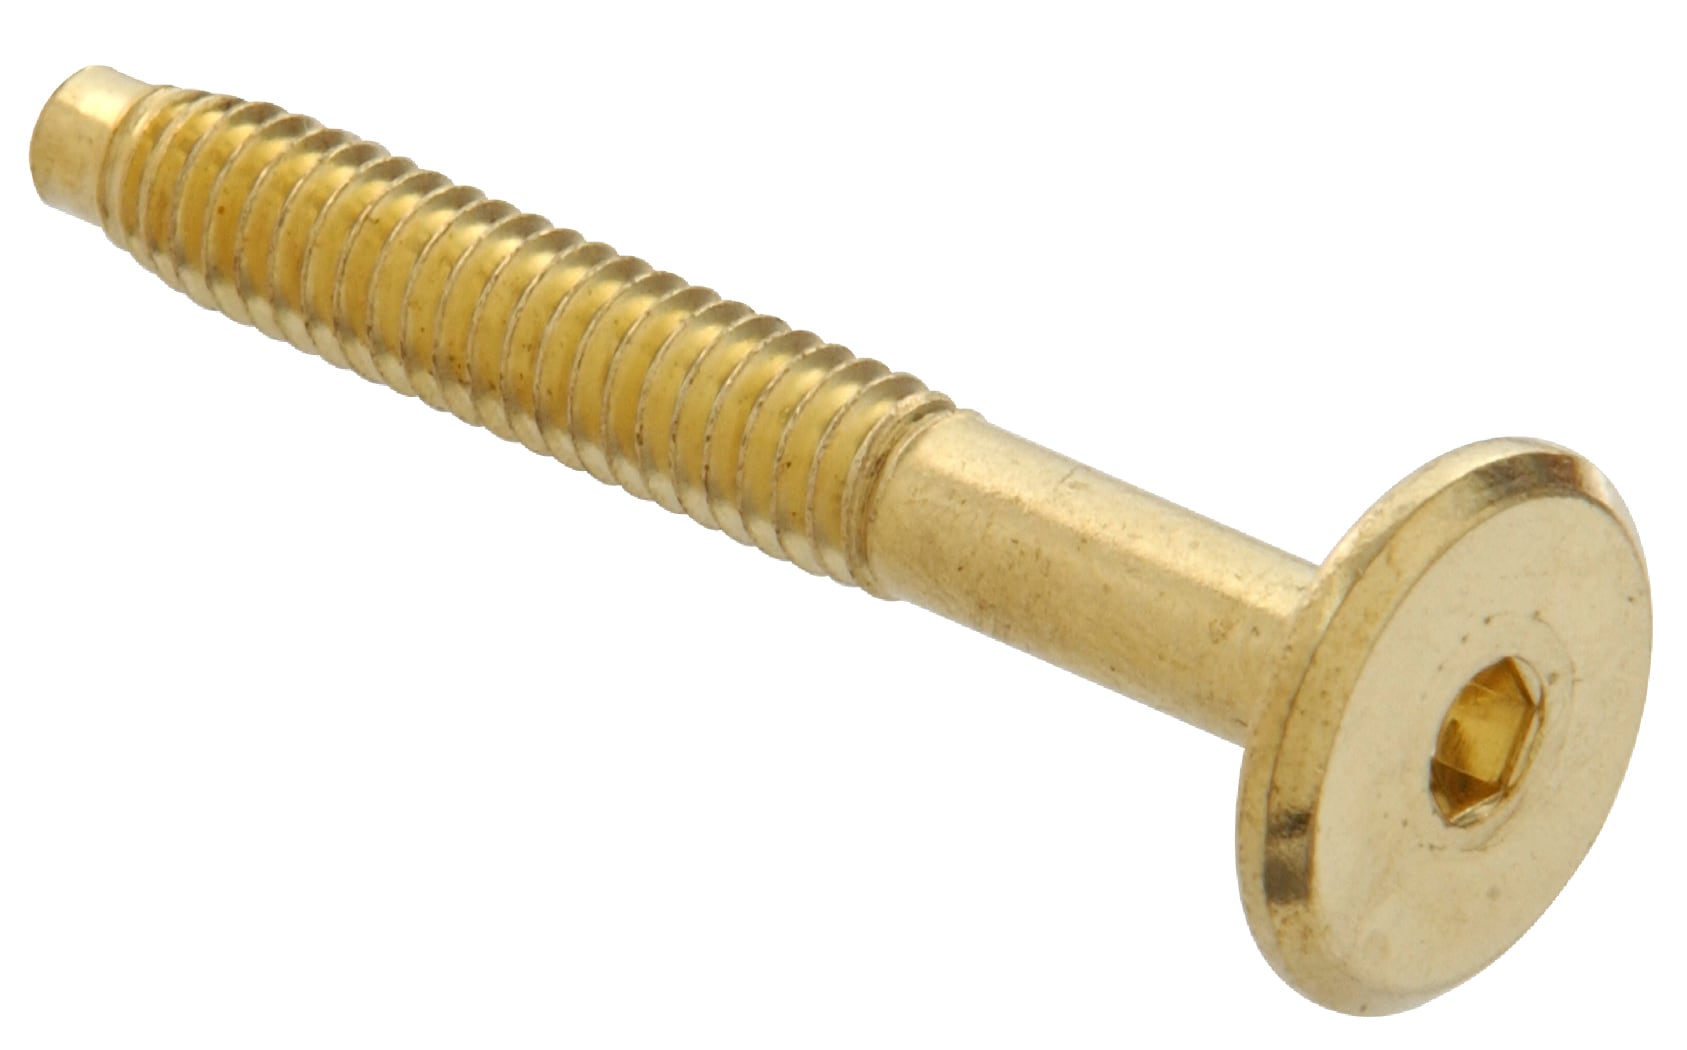 45-Pack The Hillman Group The Hillman Group 1175 Brass Chrome Plated Flat Head Slotted Wood Screw 6 x 3/4 In 